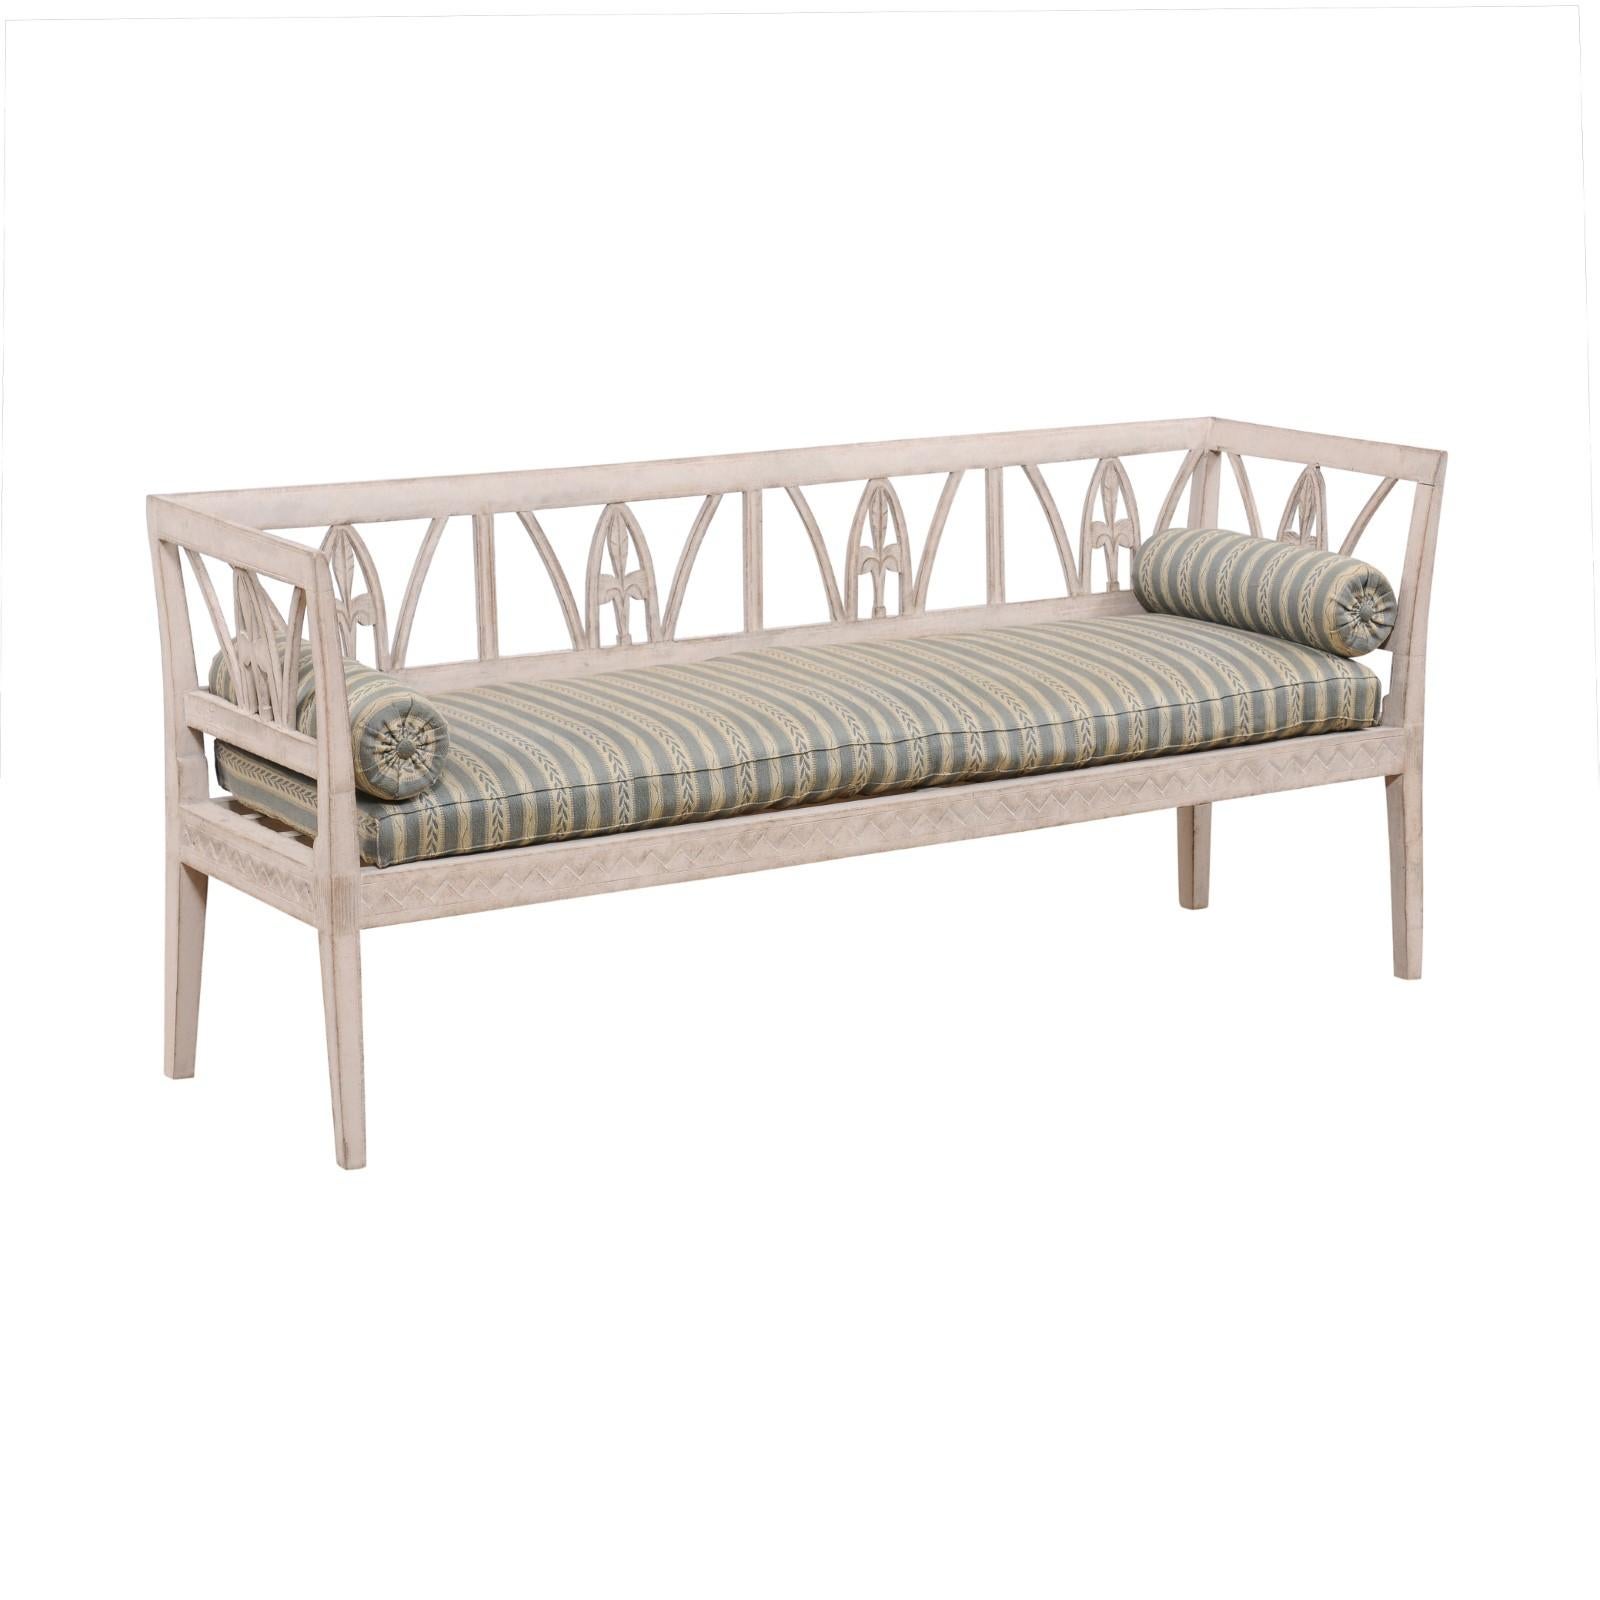 A Swedish Late Gustavian period painted wood sofa bench from the early 19th century with foliage-carved back, jagged motifs and upholstery. Created in Sweden during the first quarter of the 19th century, this Late Gustavian bench features a